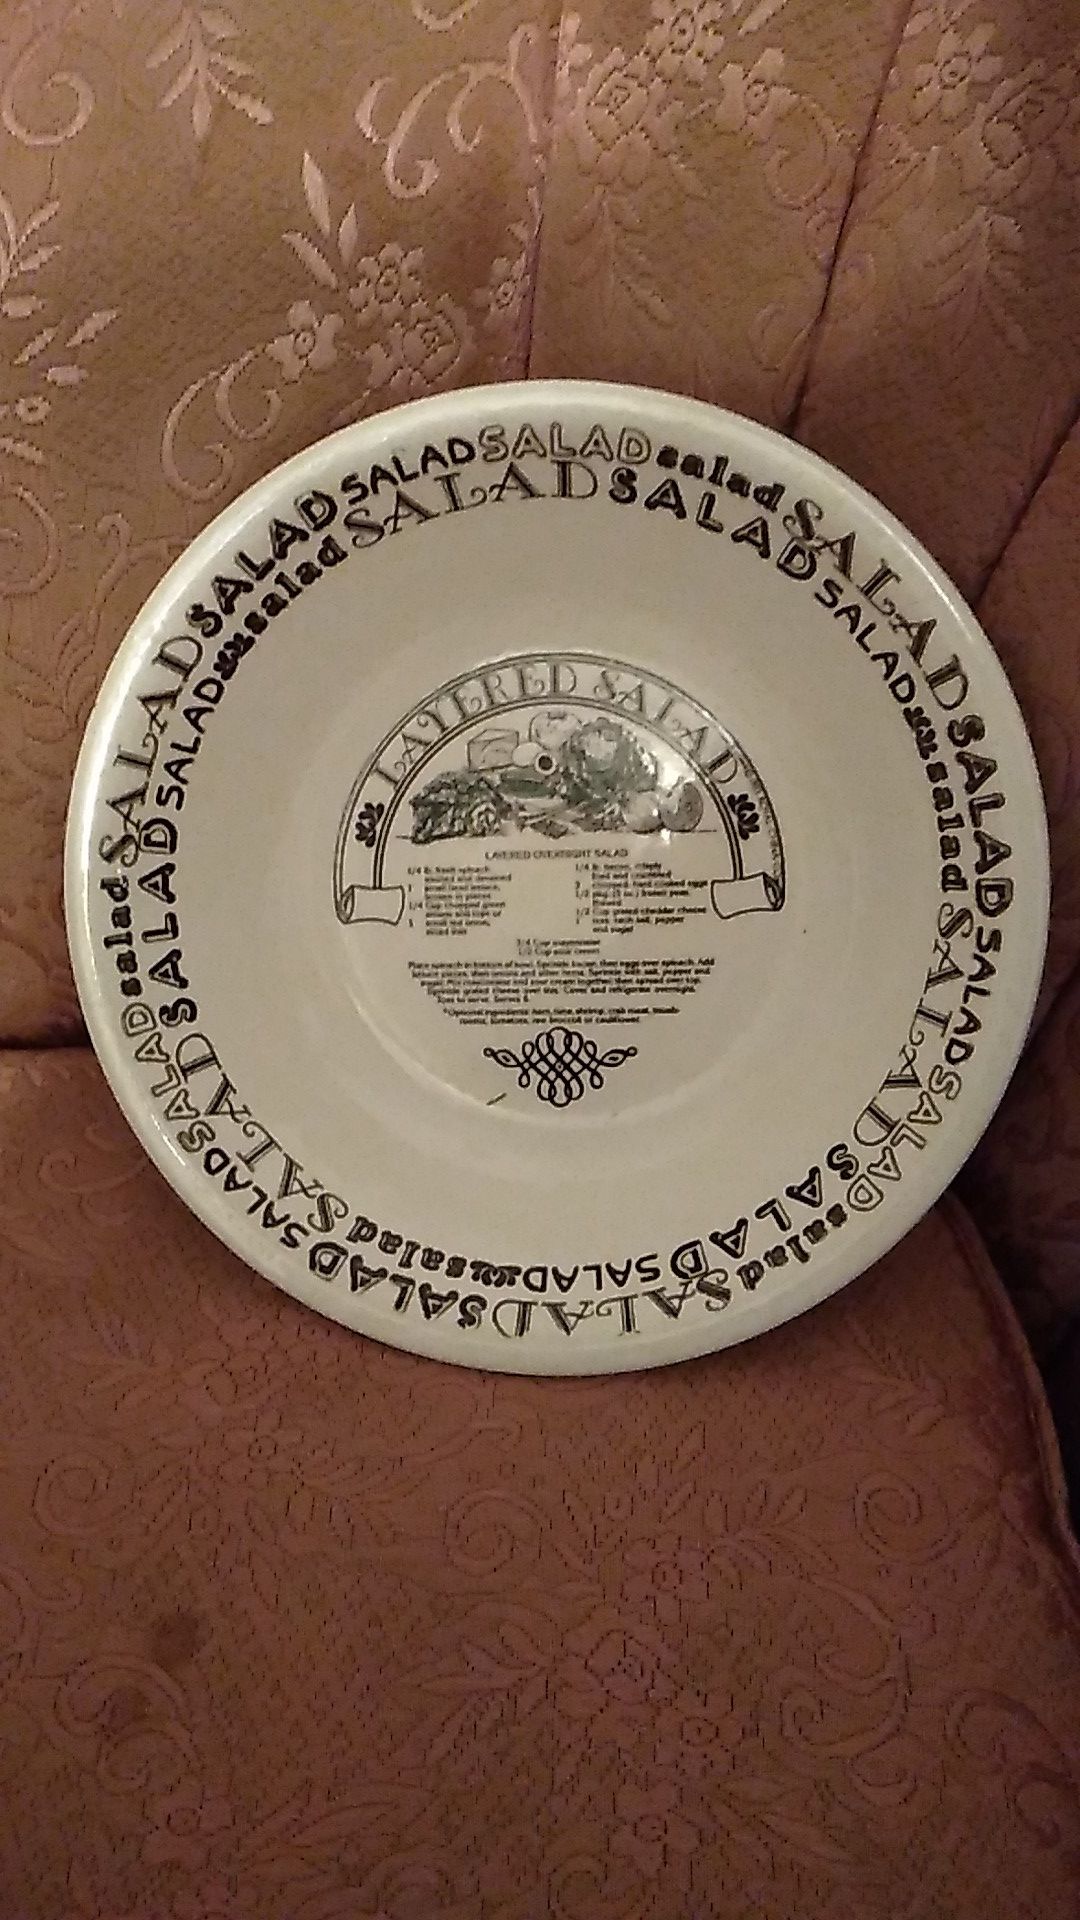 Salad Bowl By Royal China, Retains Cold For Long Periods, Comes With Recipe For Overnight Salad 🥗 Printed On Bottom Of Bowl 🥣.